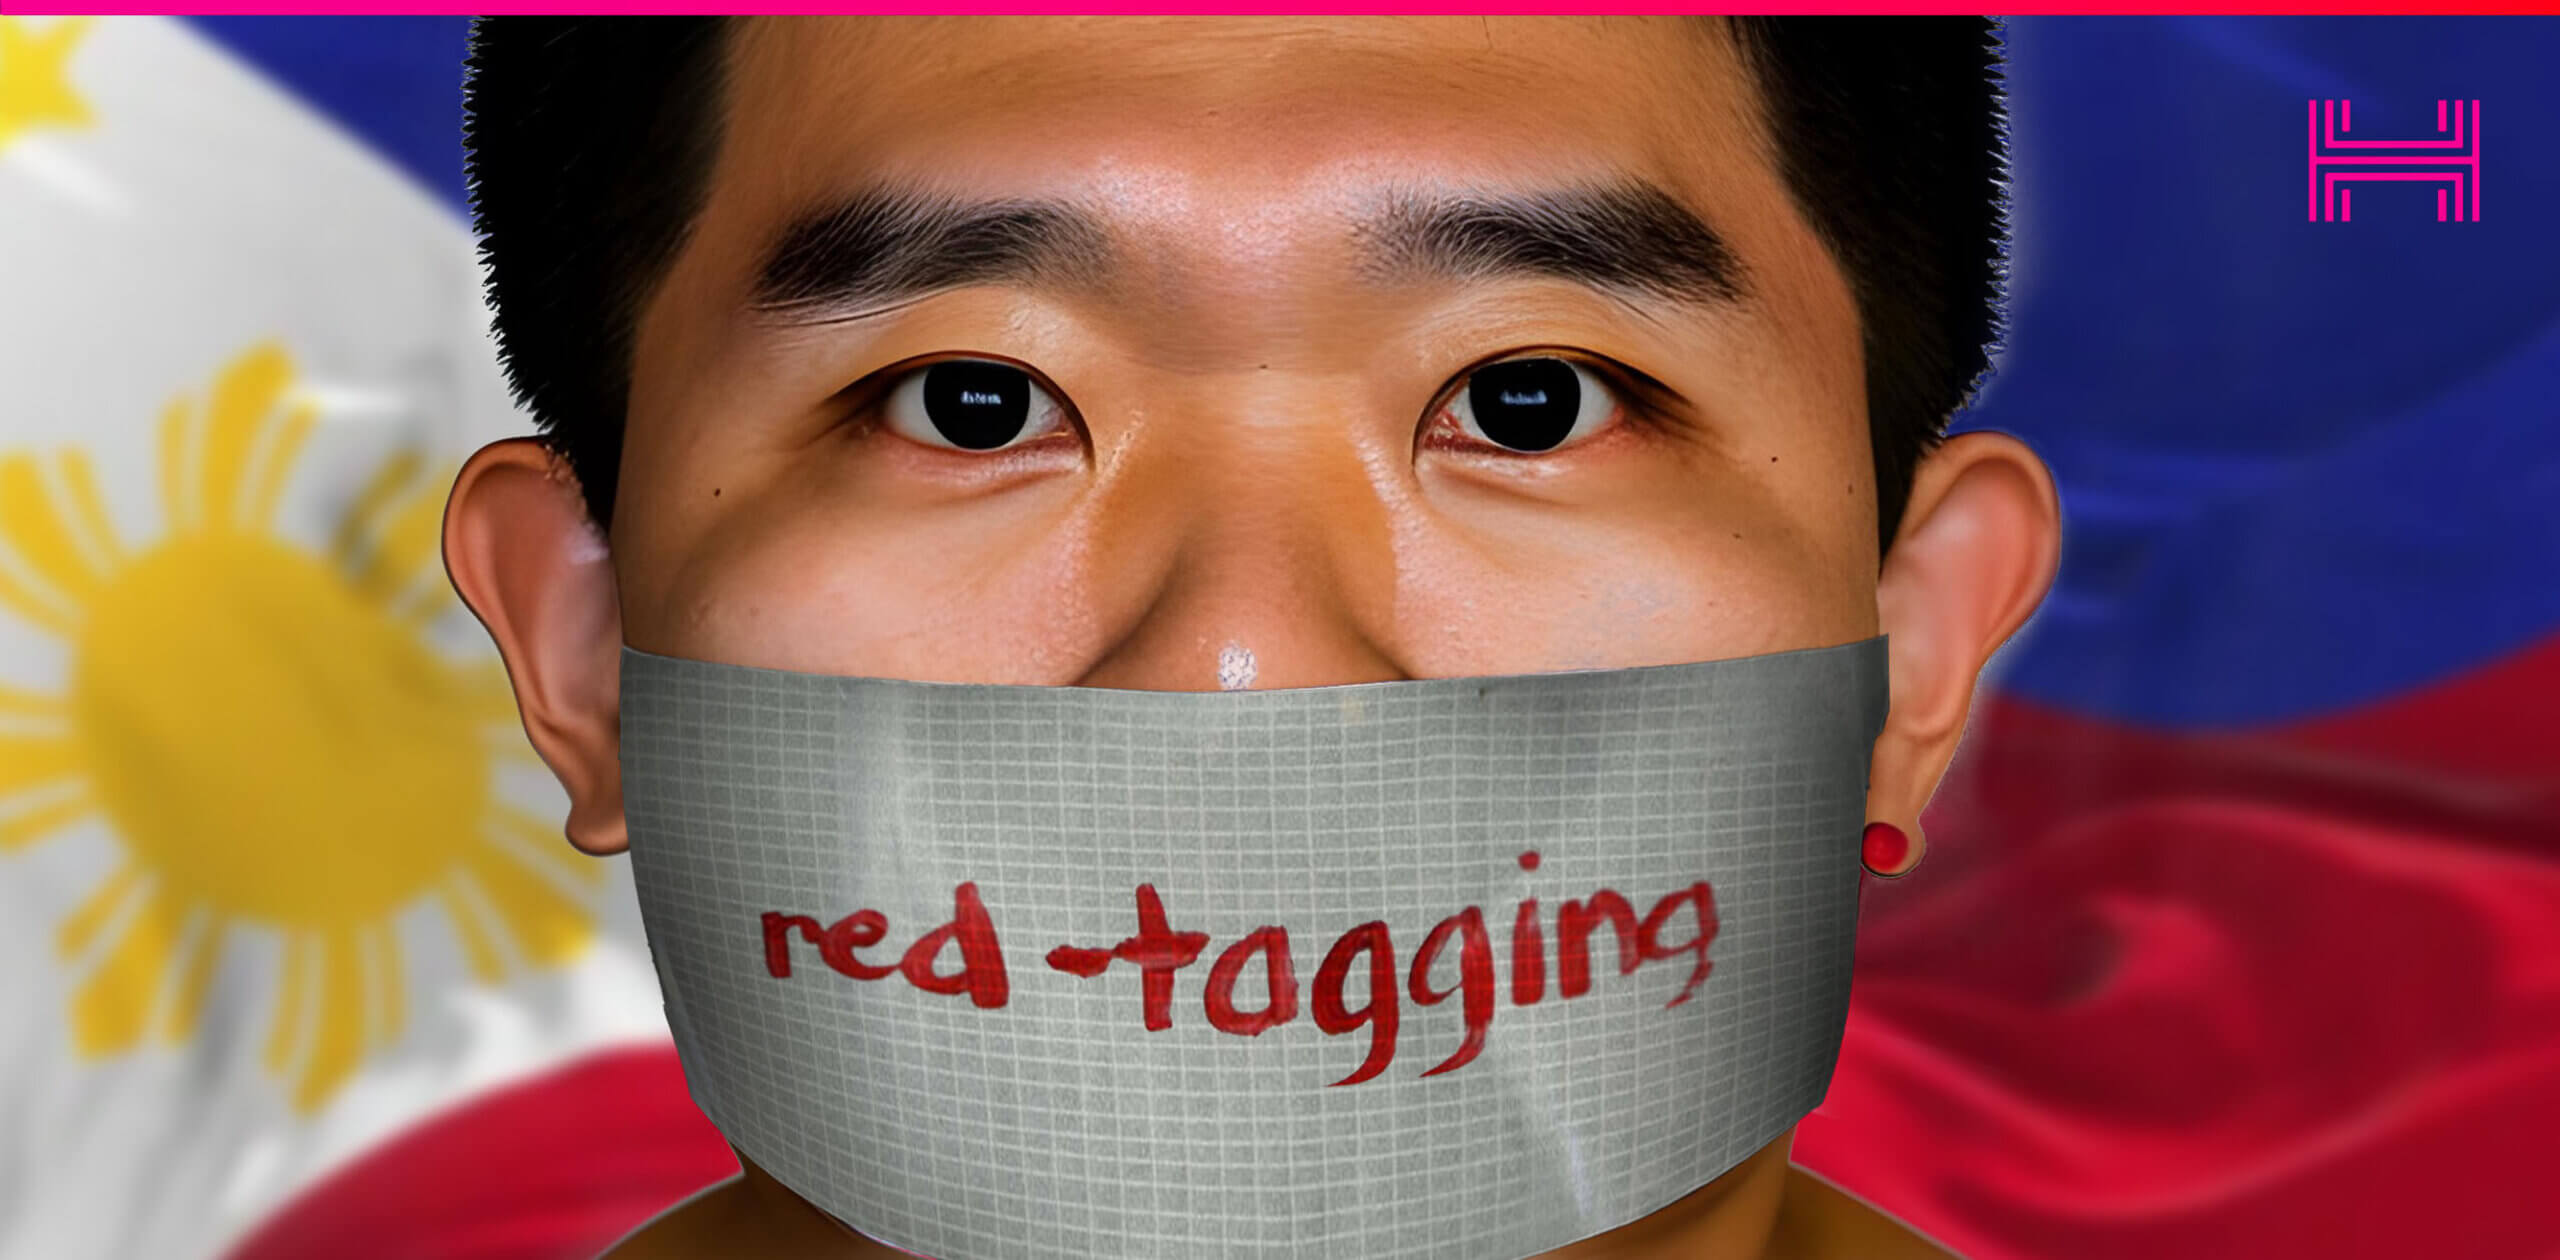 Red-Tagging in the Philippines: A License to Kill - Human Rights Foundation